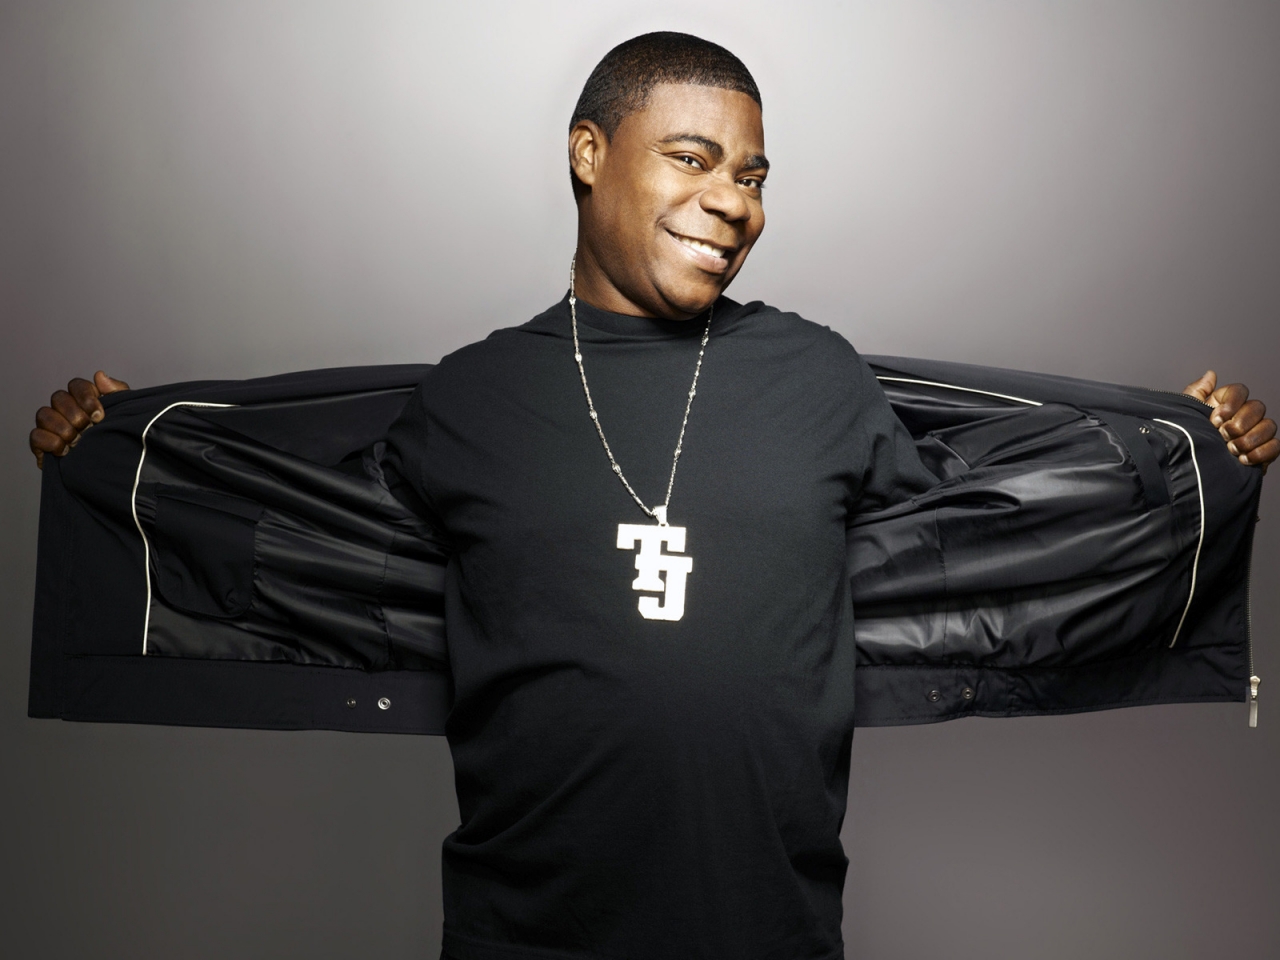 Tracy Morgan for 1280 x 960 resolution